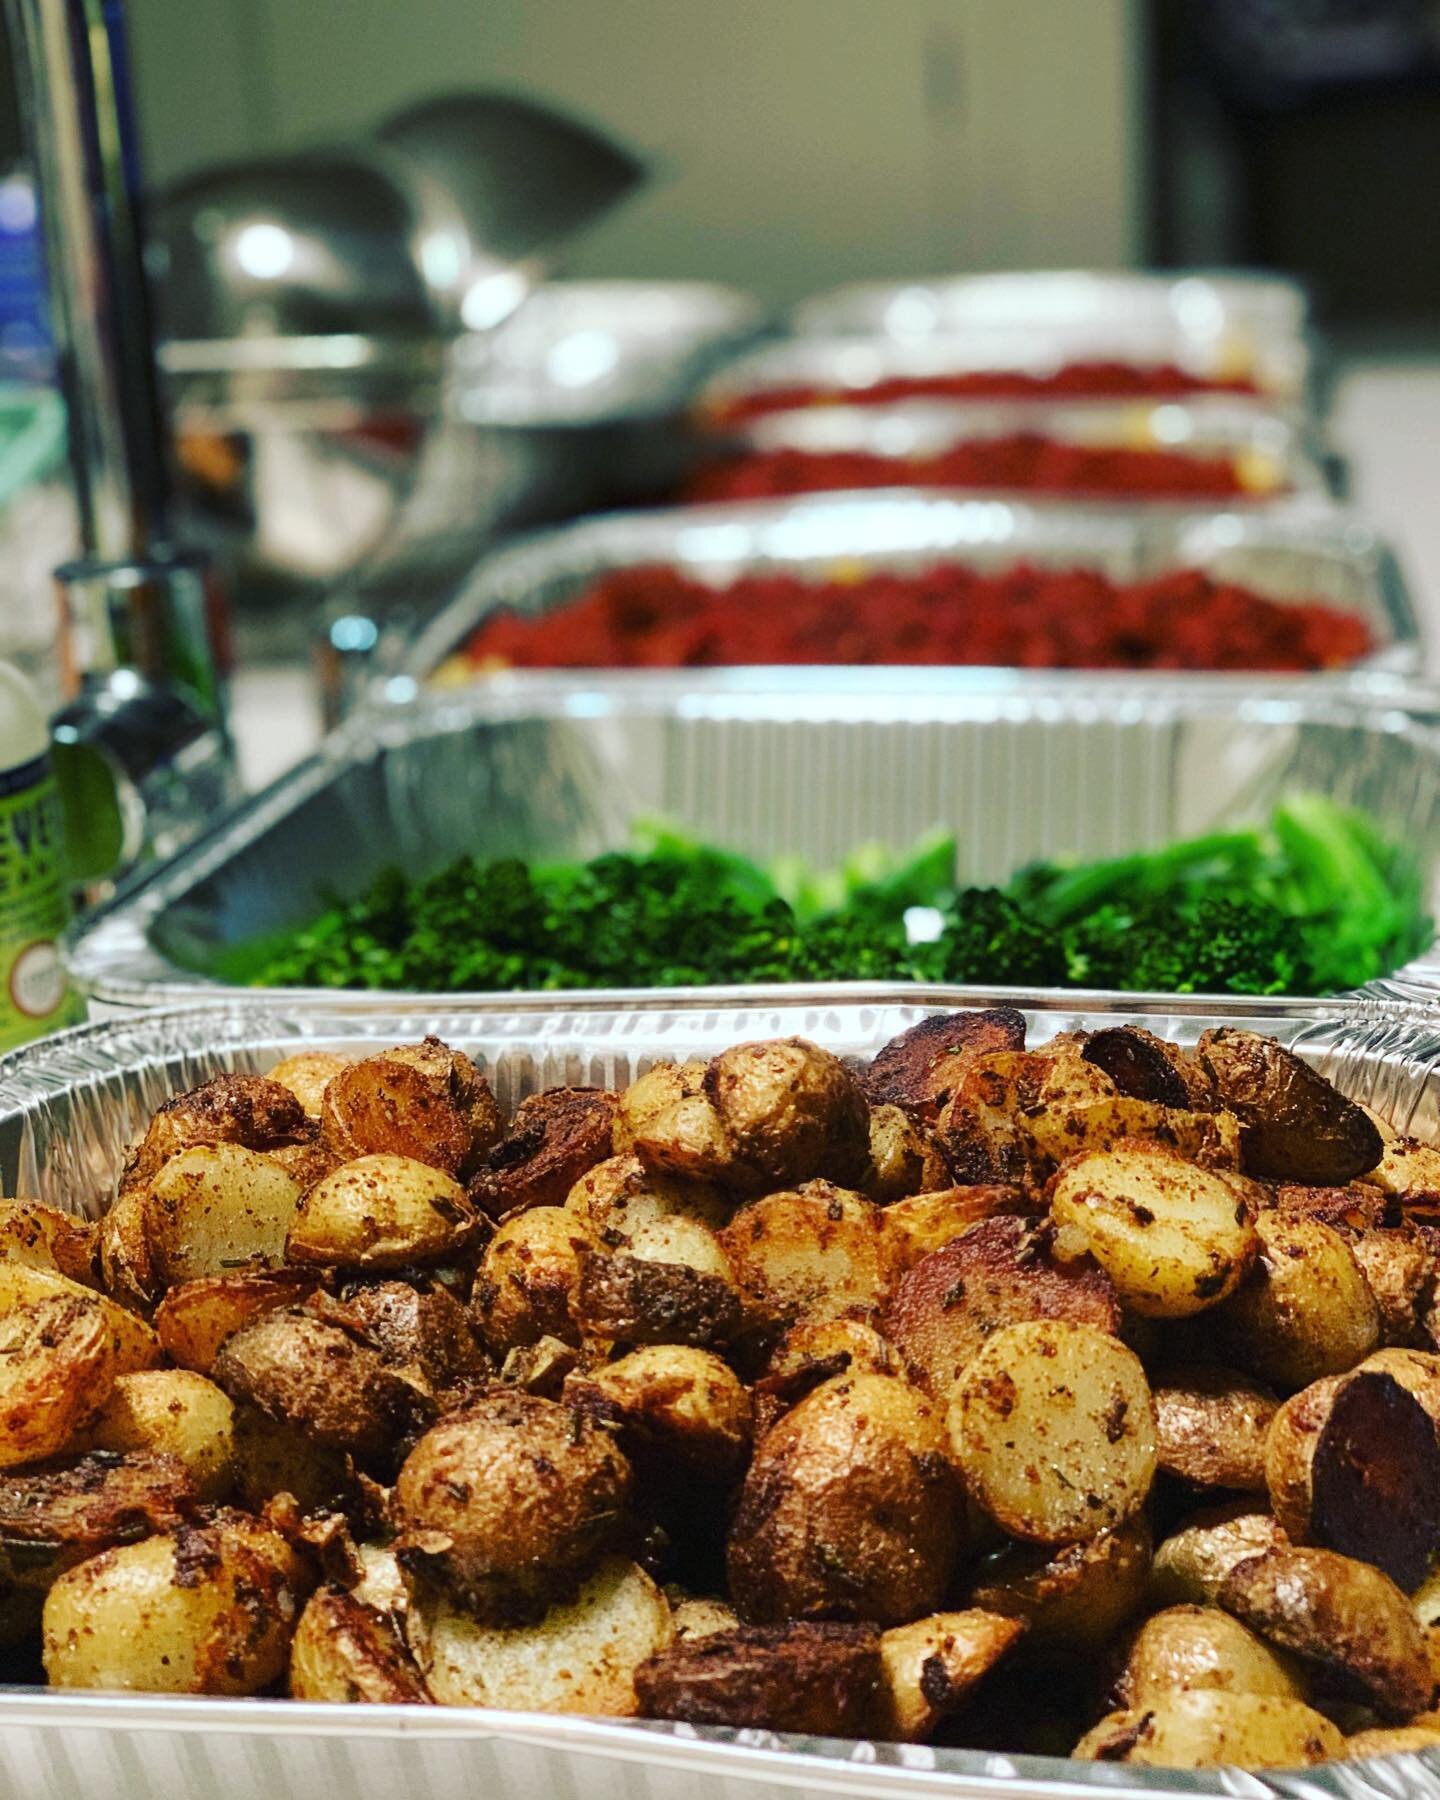 Delicious.

#catering
#smallbusiness 
#seattleeats 
#seattle 
#elcentro 
#elcentrocatering